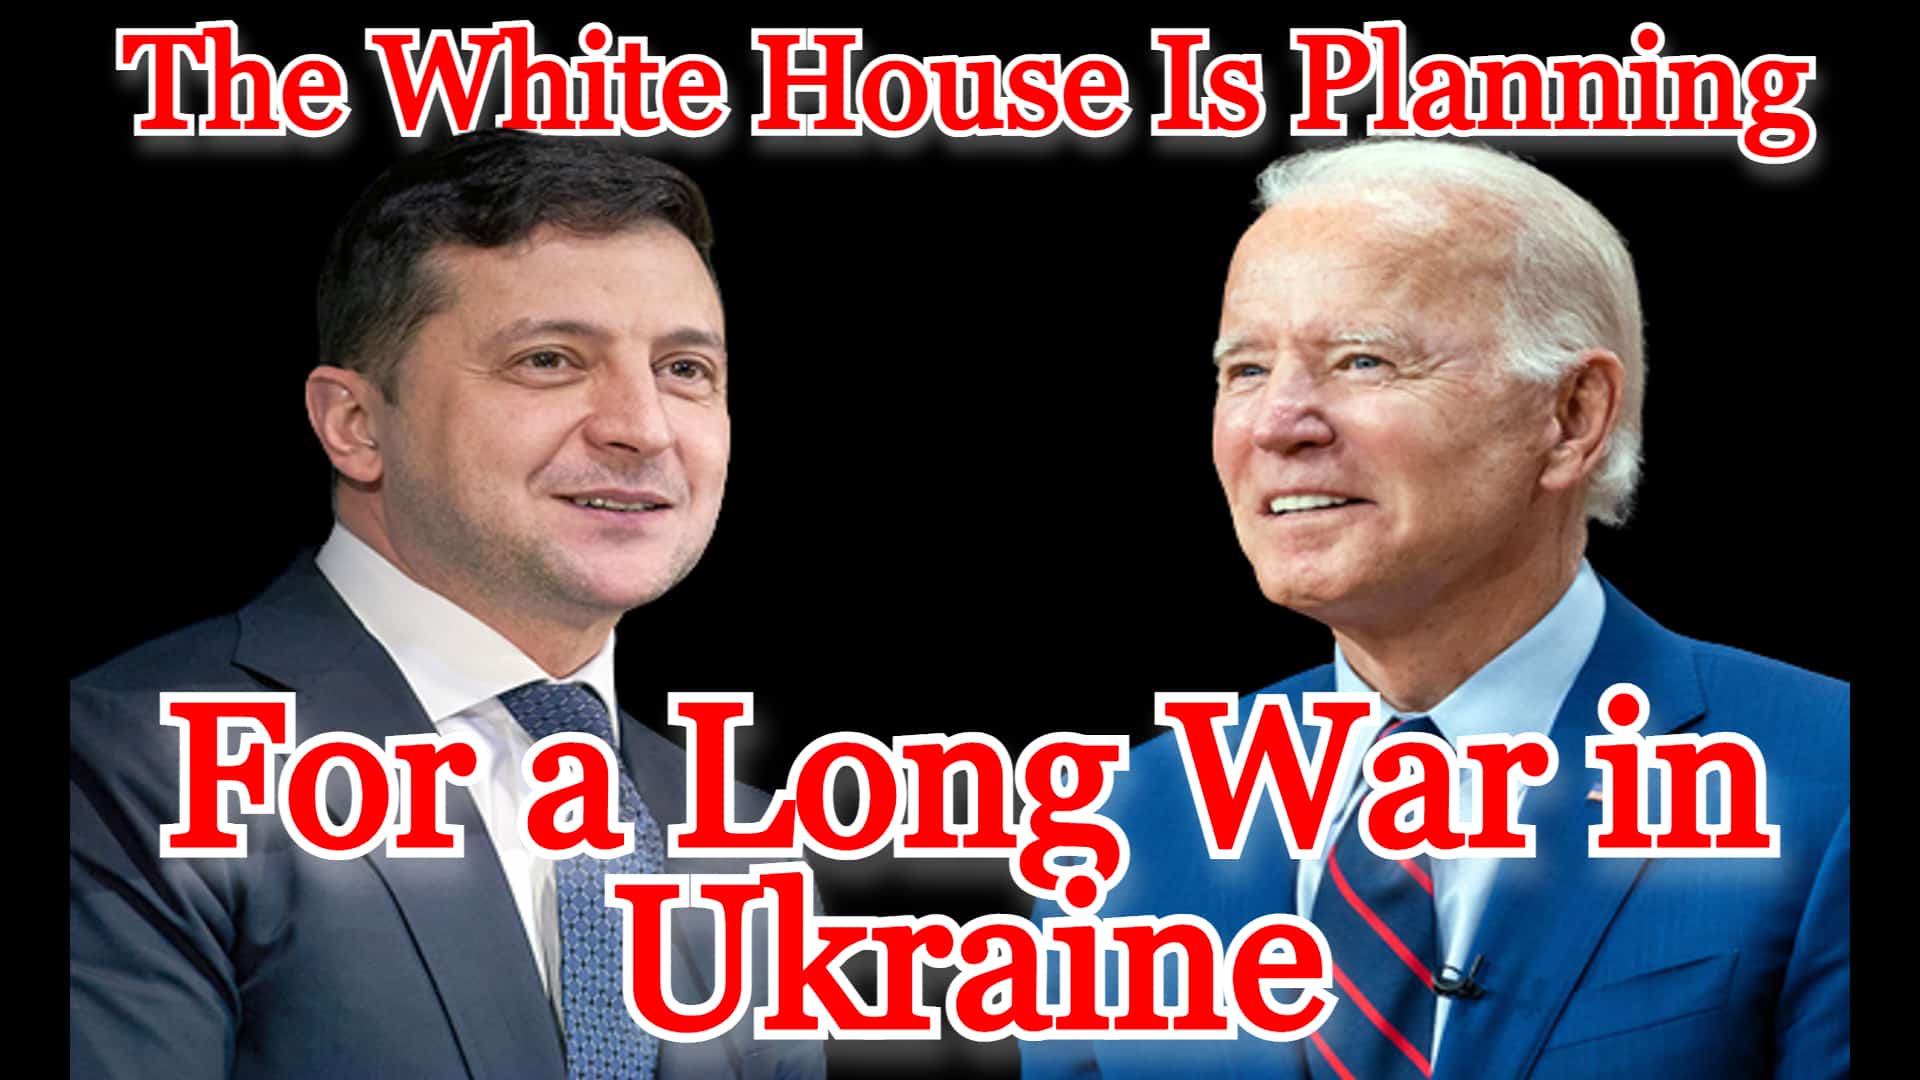 COI #317: The White House Is Planning for a Long War in Ukraine